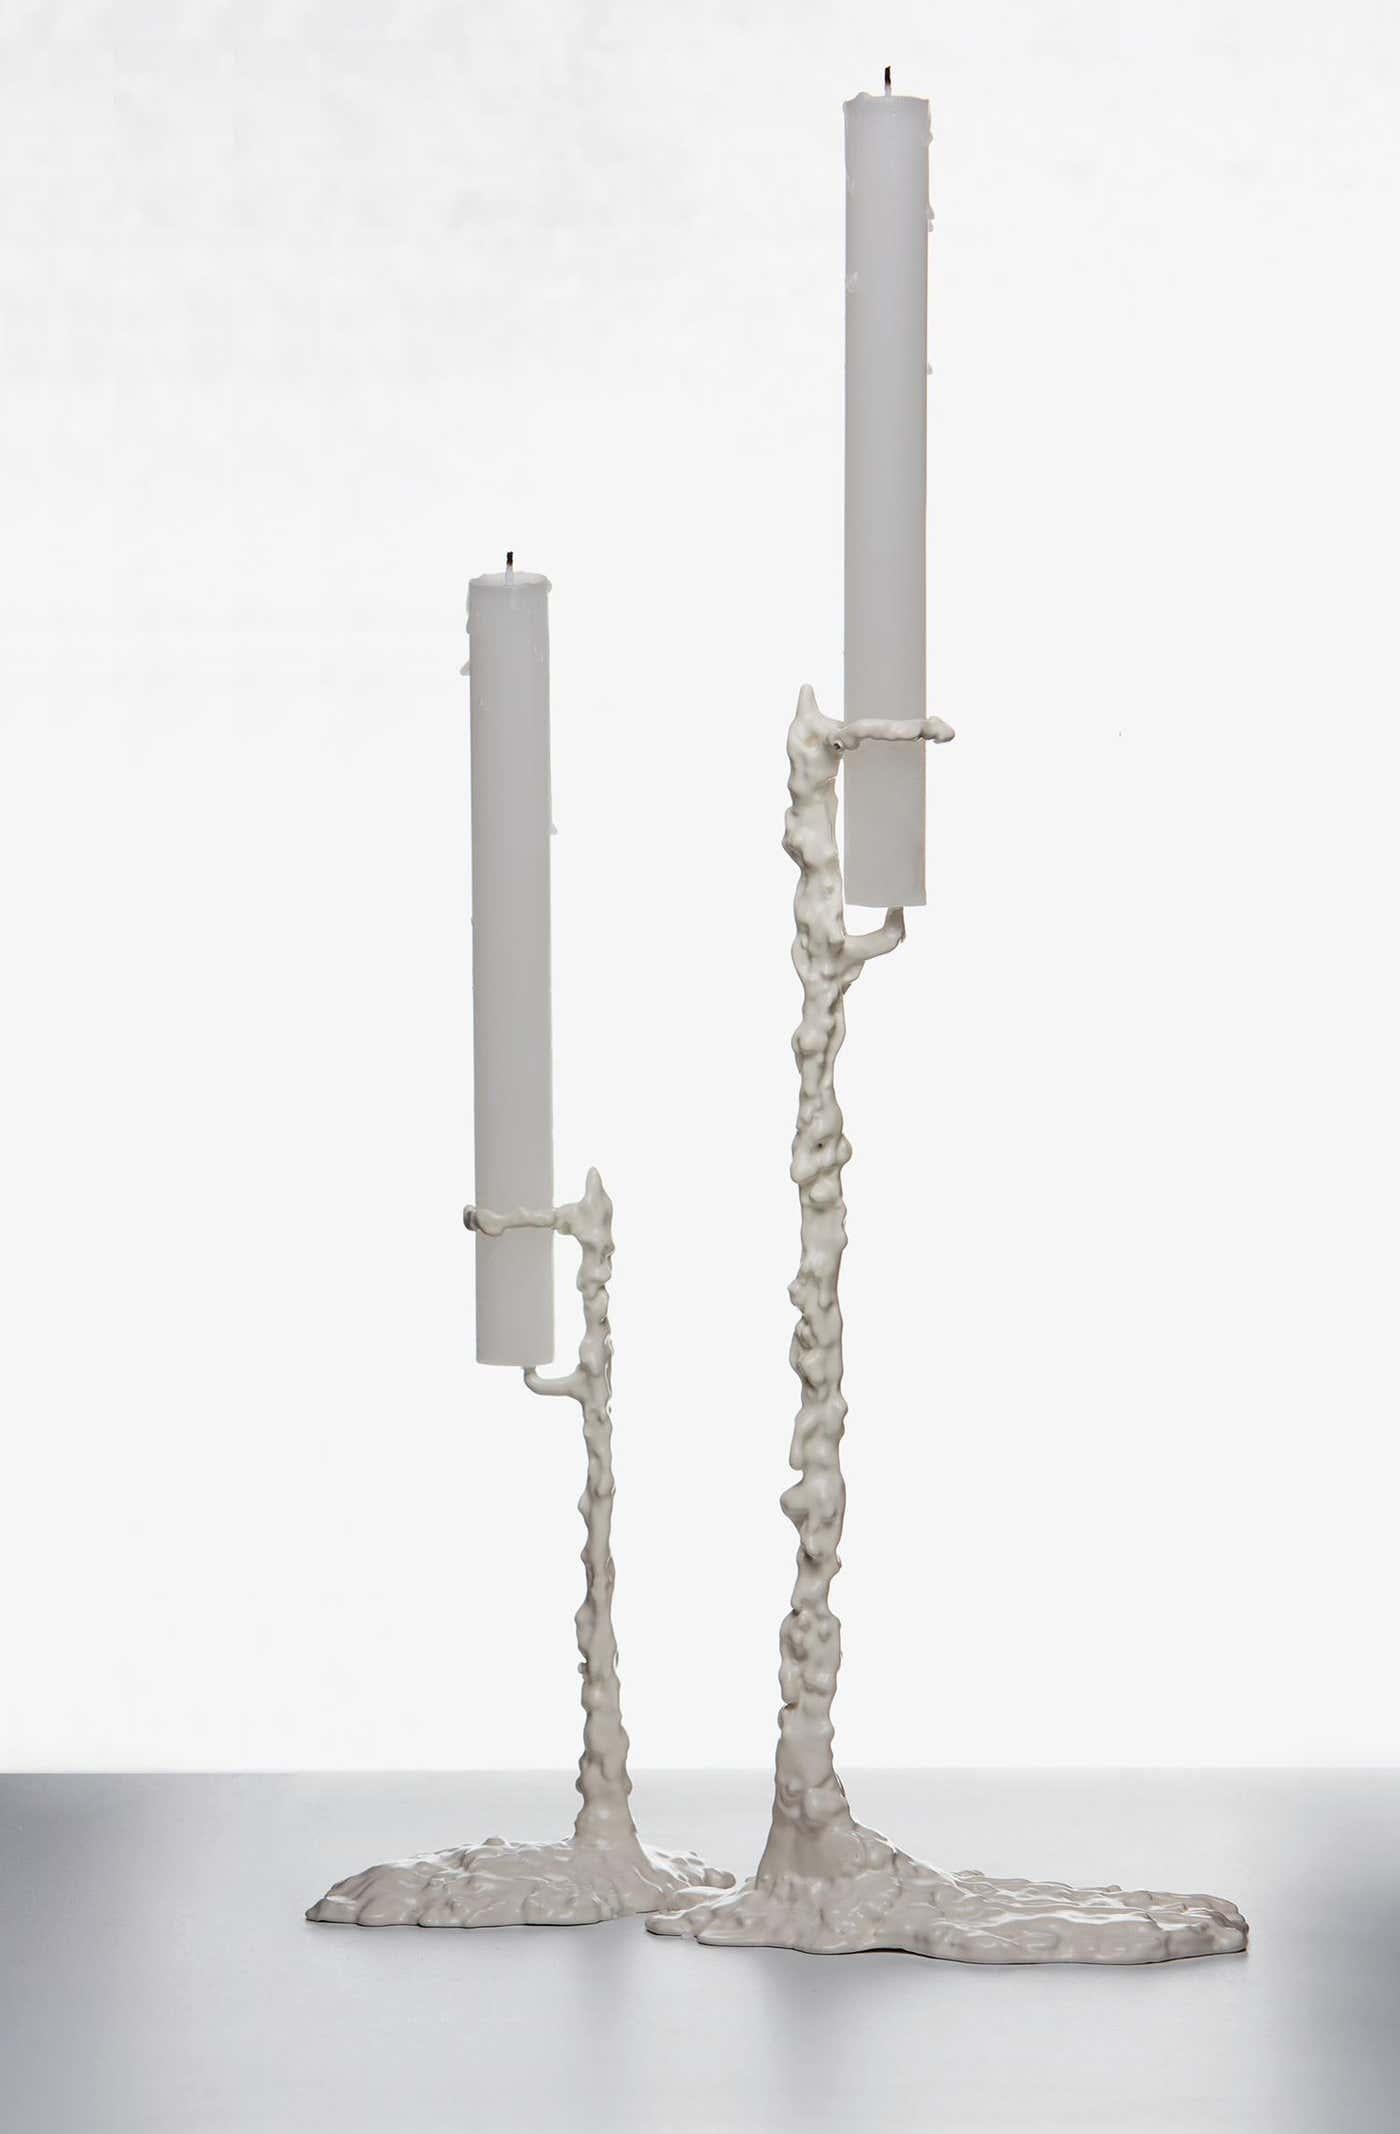 Alberto Pair of Candleholders designed by Oscar Tusquets.
Manufactured by Bd Barcelona (Spain).

Candleholder in cast brass finish.

Dimensions: 
High: D 8 x W 12 x H 28 cm. 
Low: D 6 x W 10 x H 20 cm.

Alberto designed by Oscar Tusquets for BD